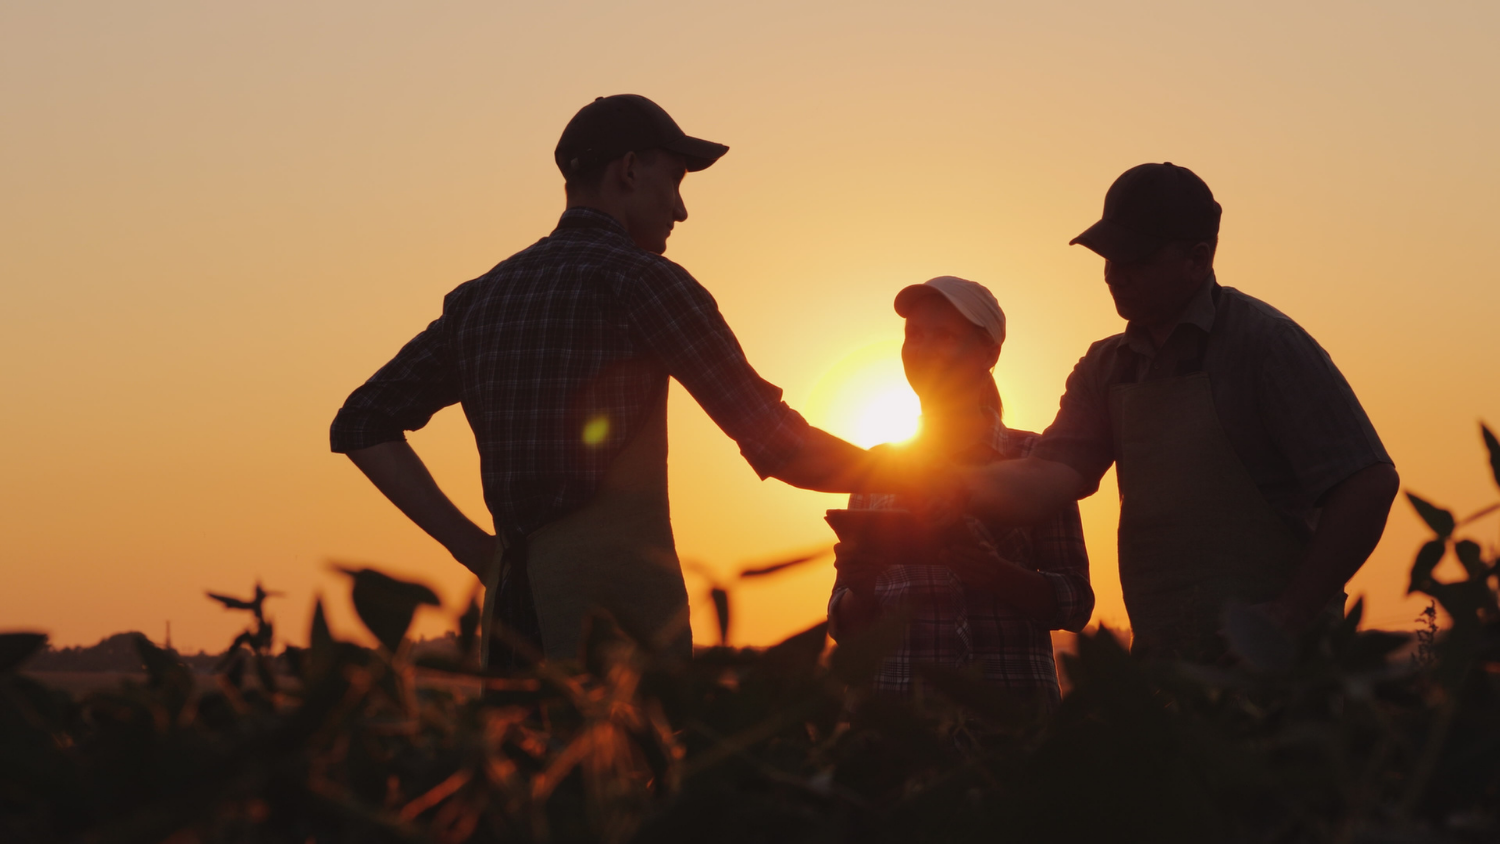 Profiles of three people standing in a field during sunset